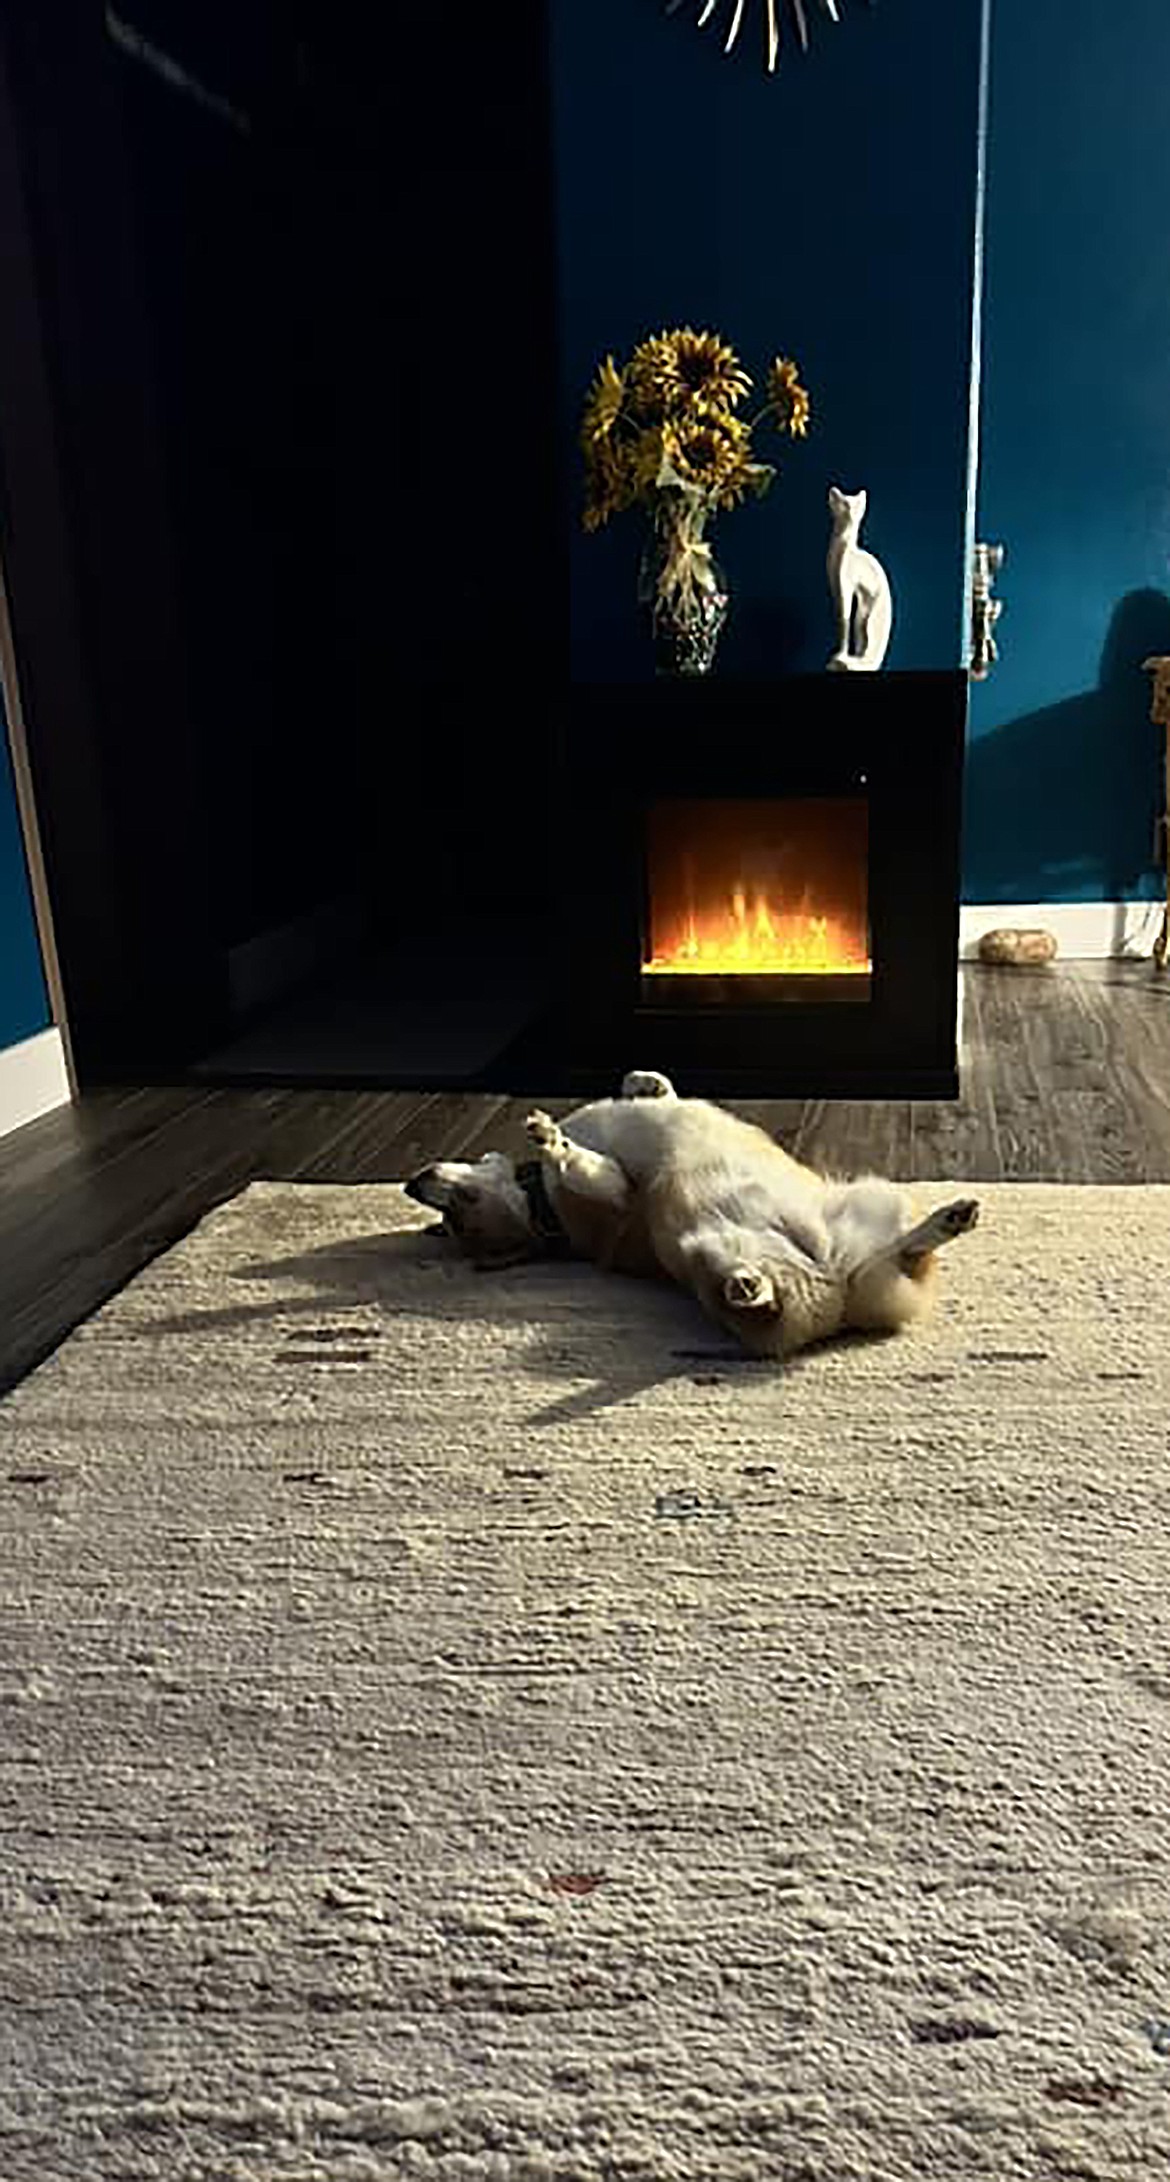 Corinna Lockwood shared this Best Shot of a four-legged family member finding a warm spot to relax. If you have a photo that you took that you would like to see run as a Best Shot or I Took The Bee send it in to the Bonner County Daily Bee, P.O. Box 159, Sandpoint, Idaho, 83864; or drop them off at 310 Church St., Sandpoint. You may also email your pictures to the Bonner County Daily Bee along with your name, caption information, hometown, and phone number to news@bonnercountydailybee.com.